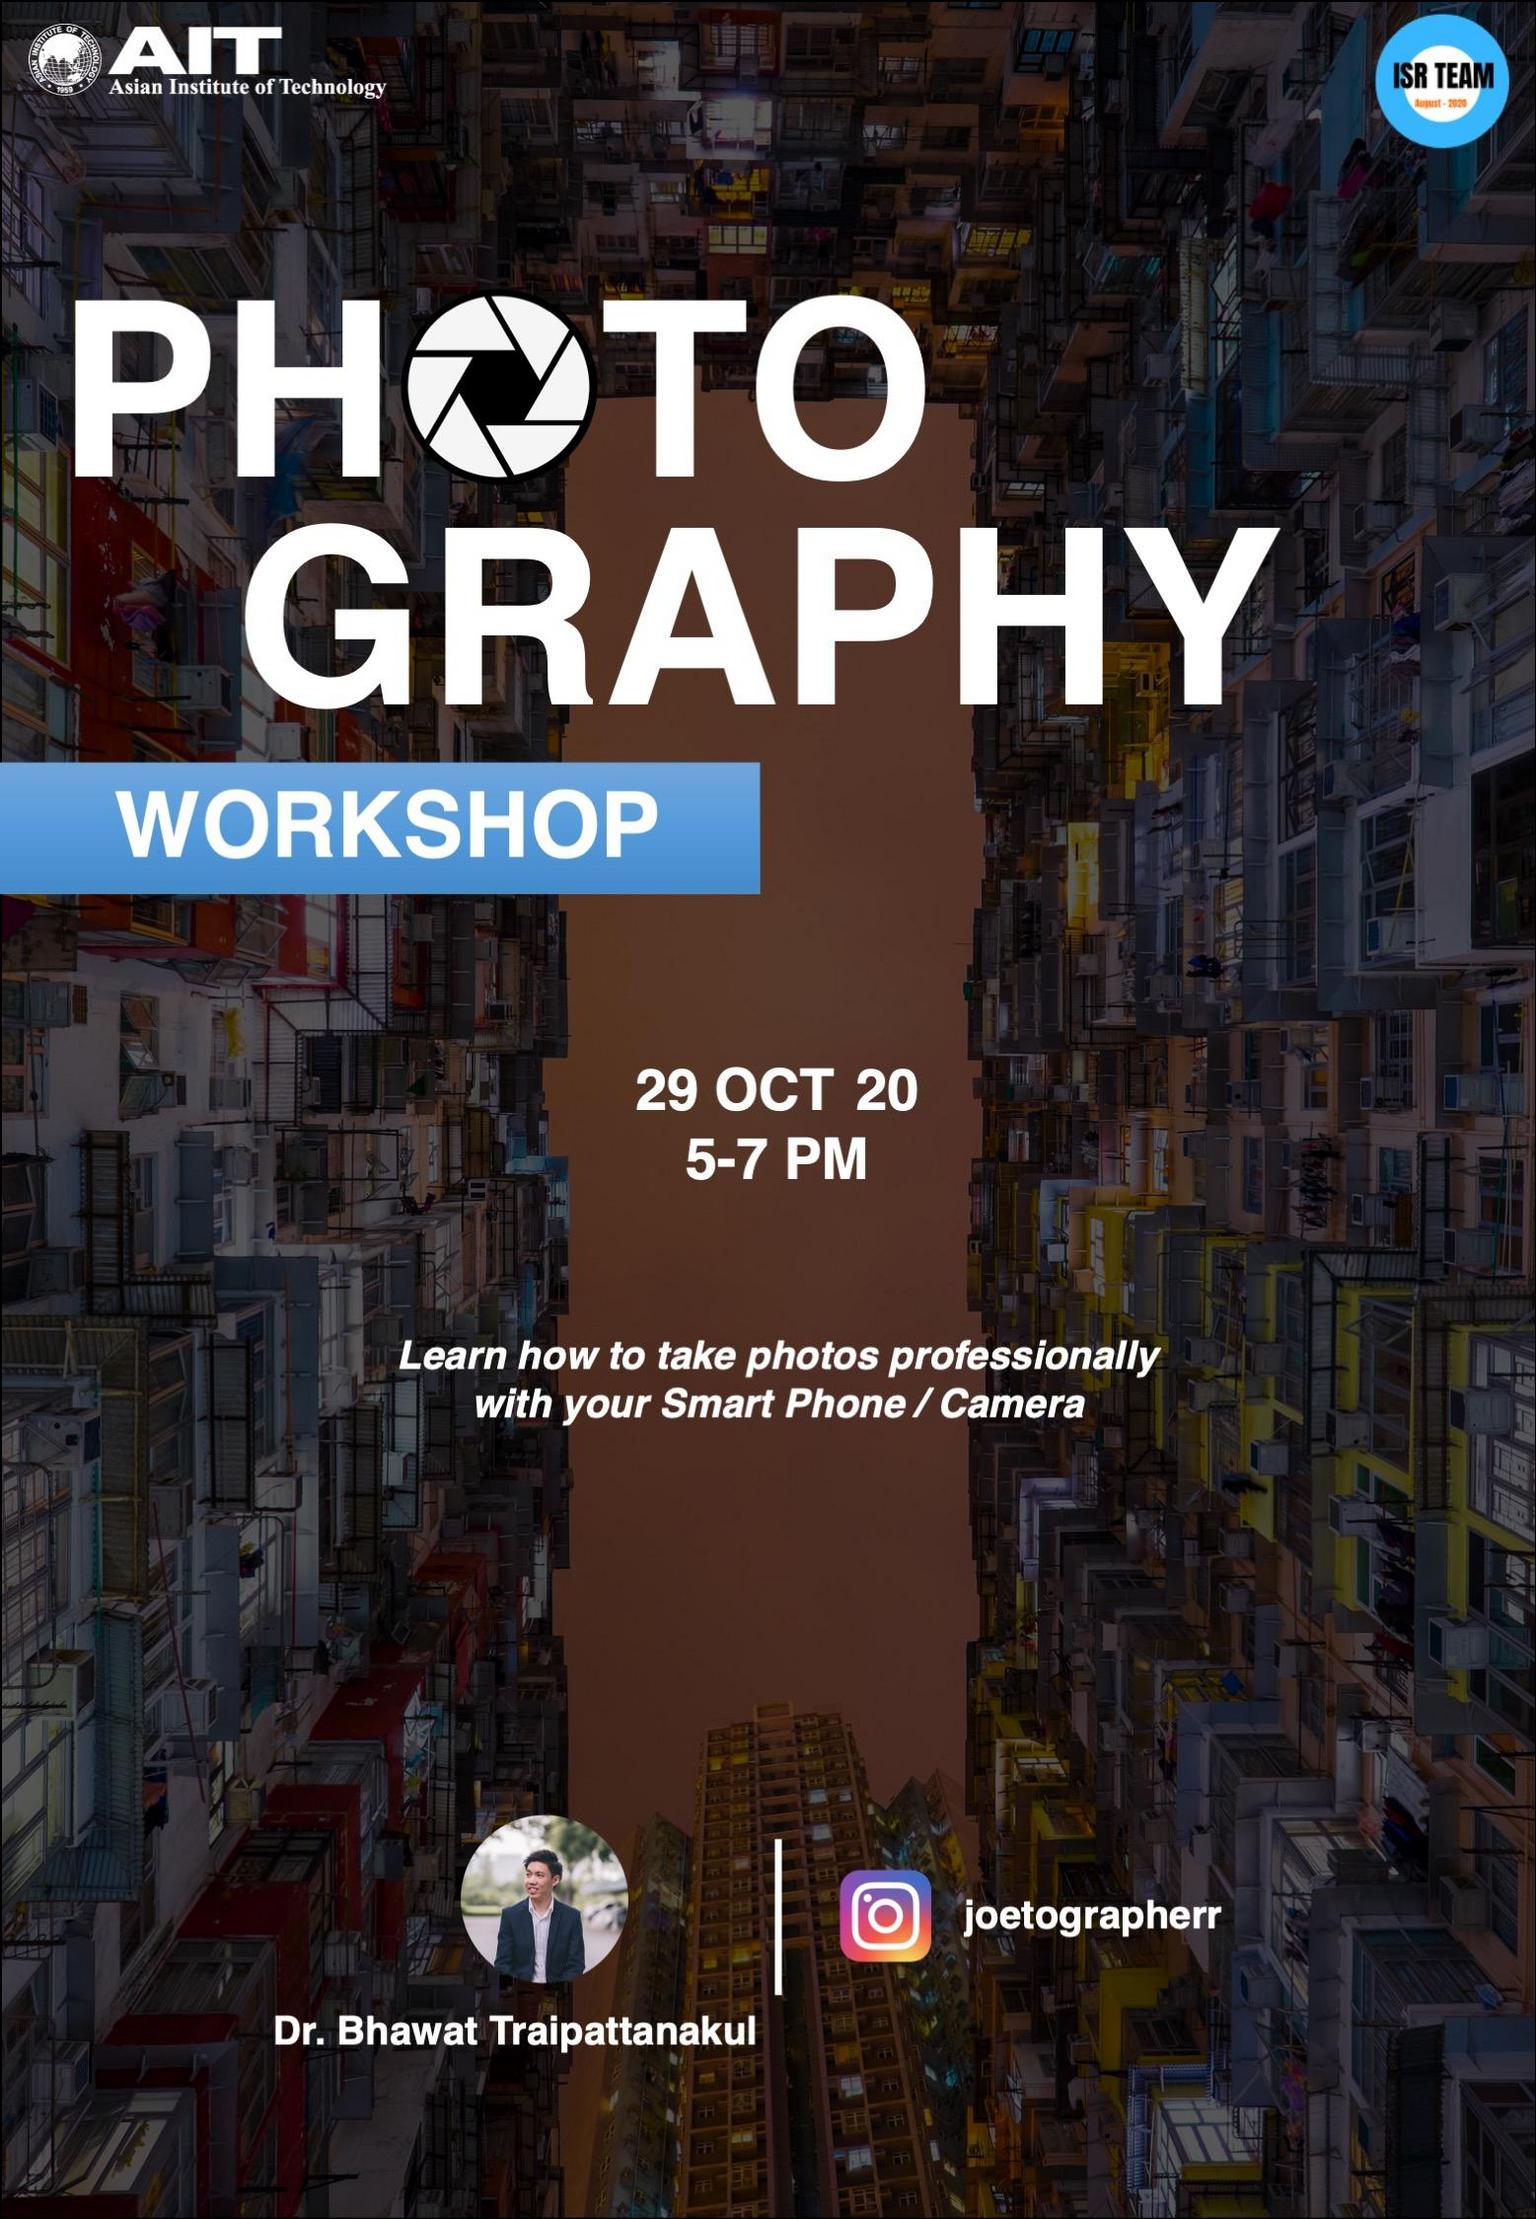 Photography workshop conducted by Dr. Bhawat Traipattanakul